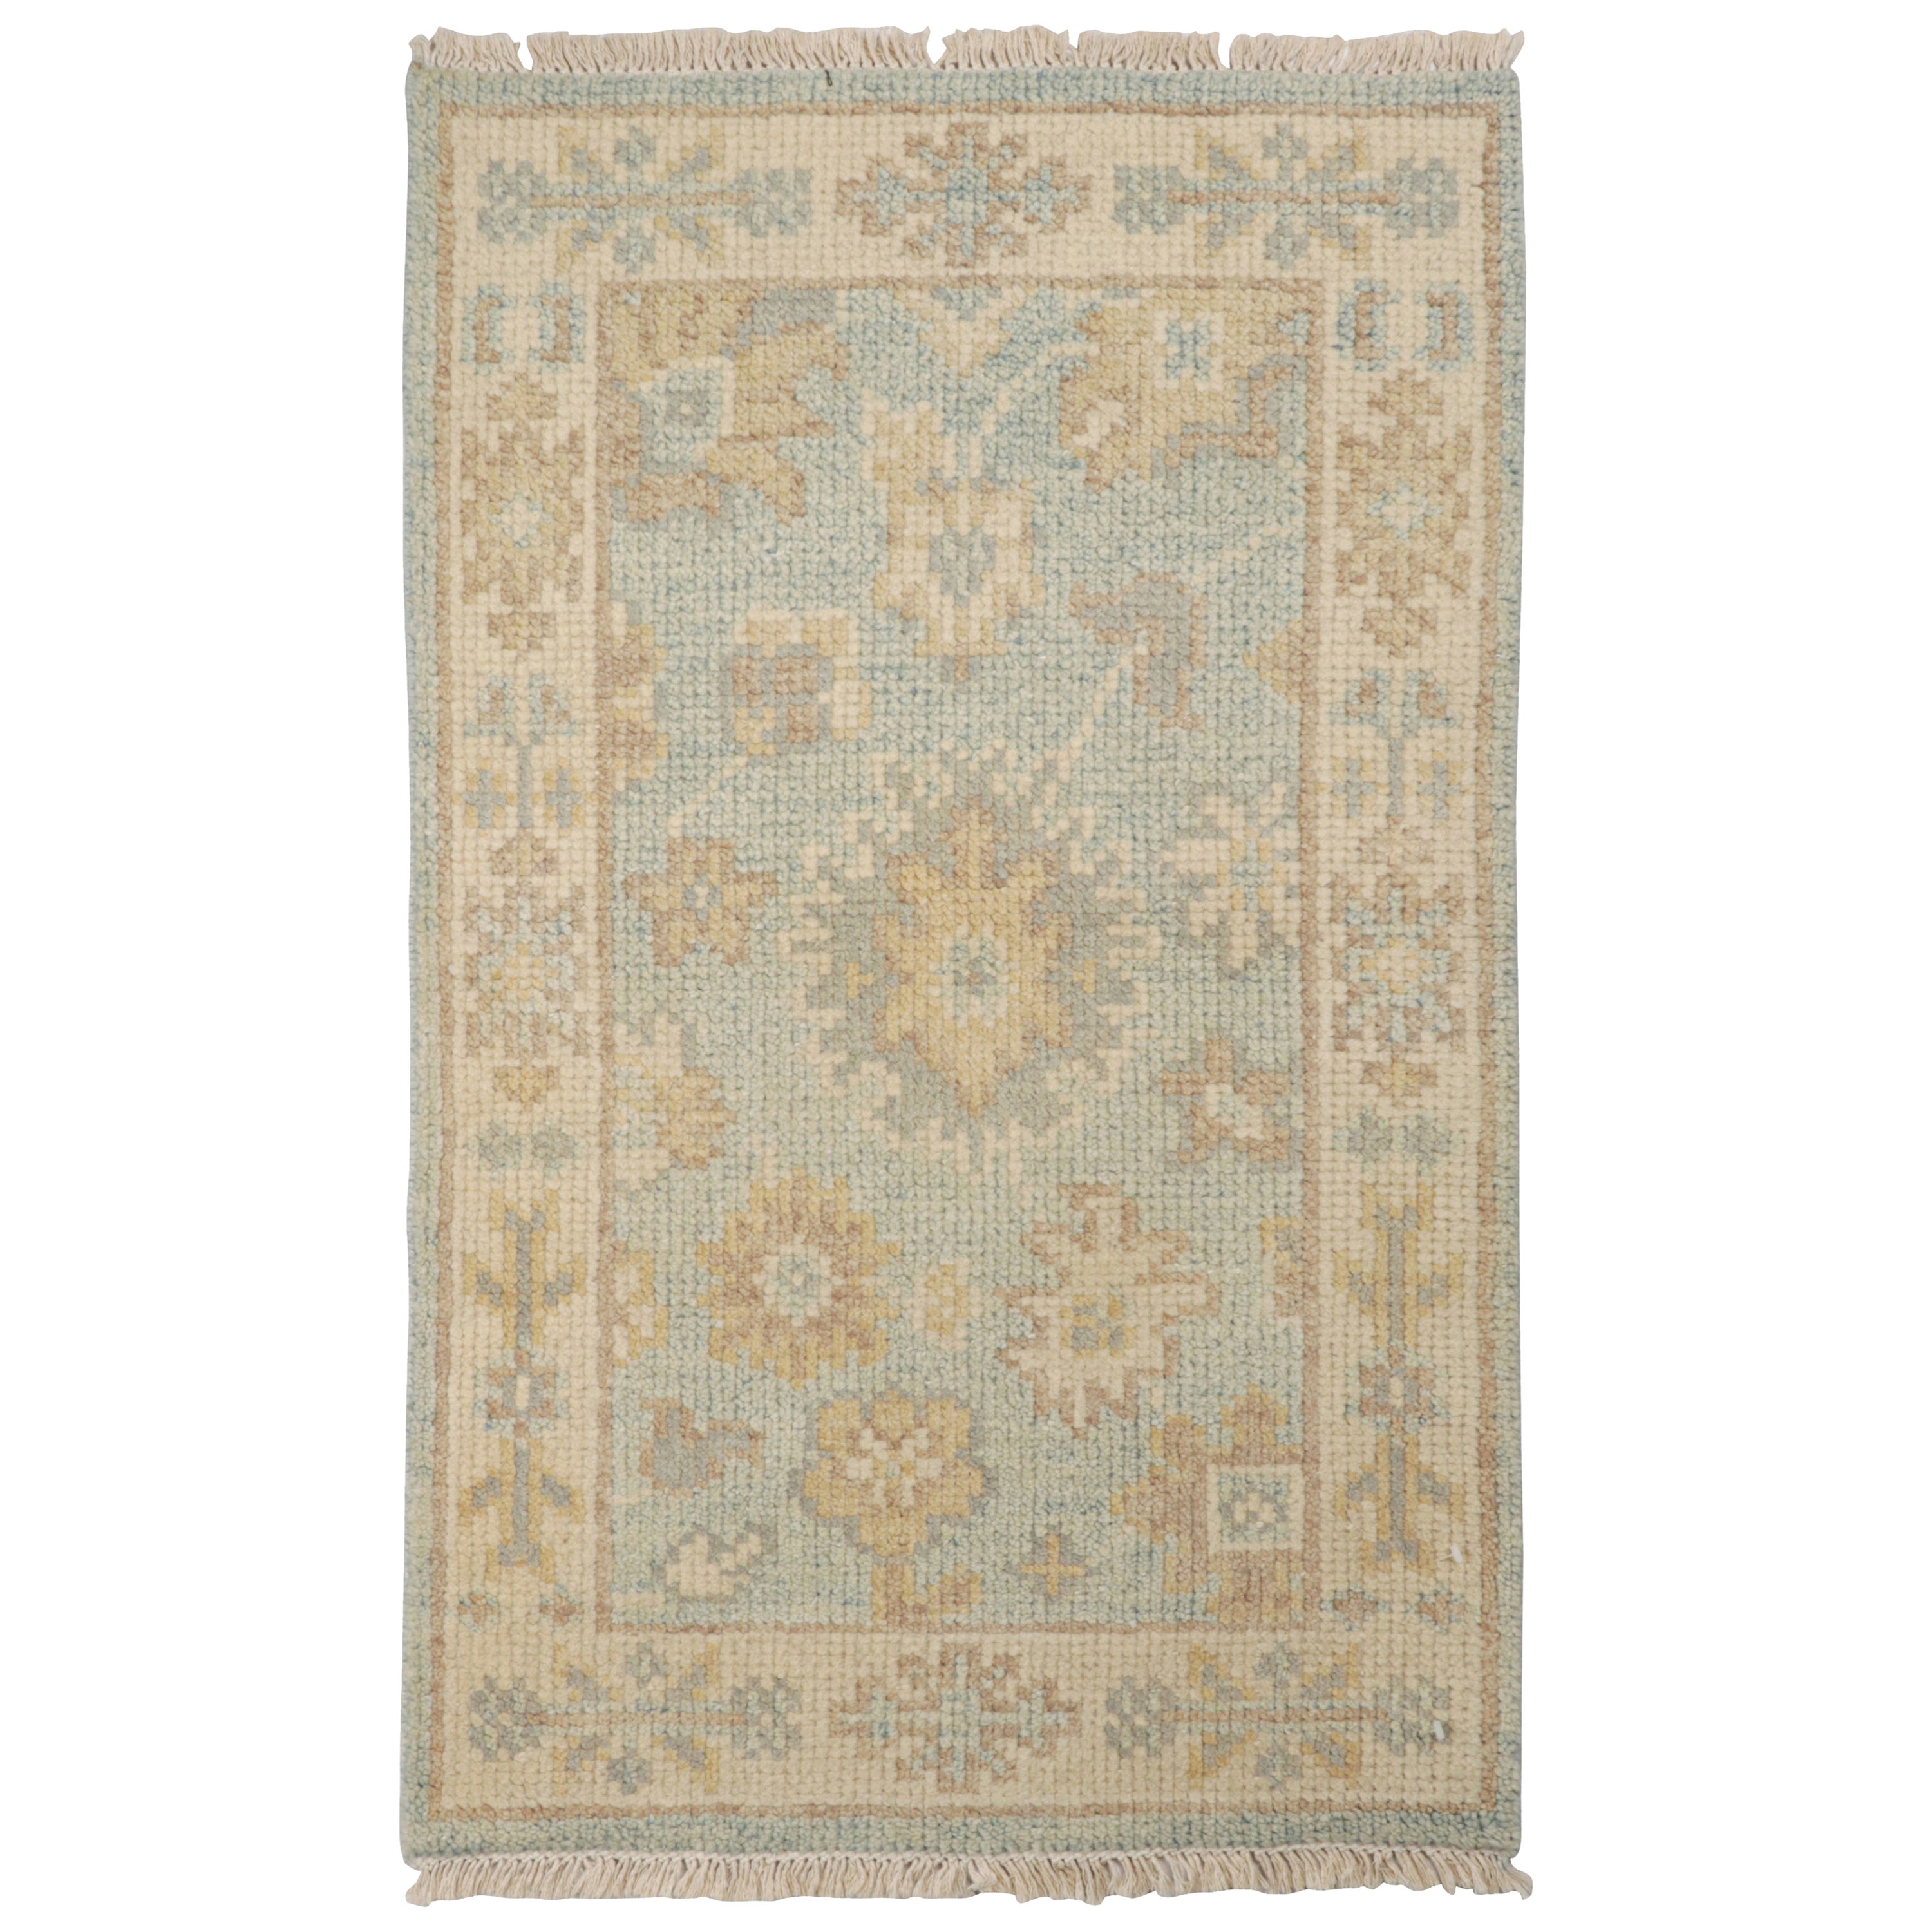 Rug & Kilim’s Oushak Style Rug in Blue with Beige-Brown Floral Patterns For Sale